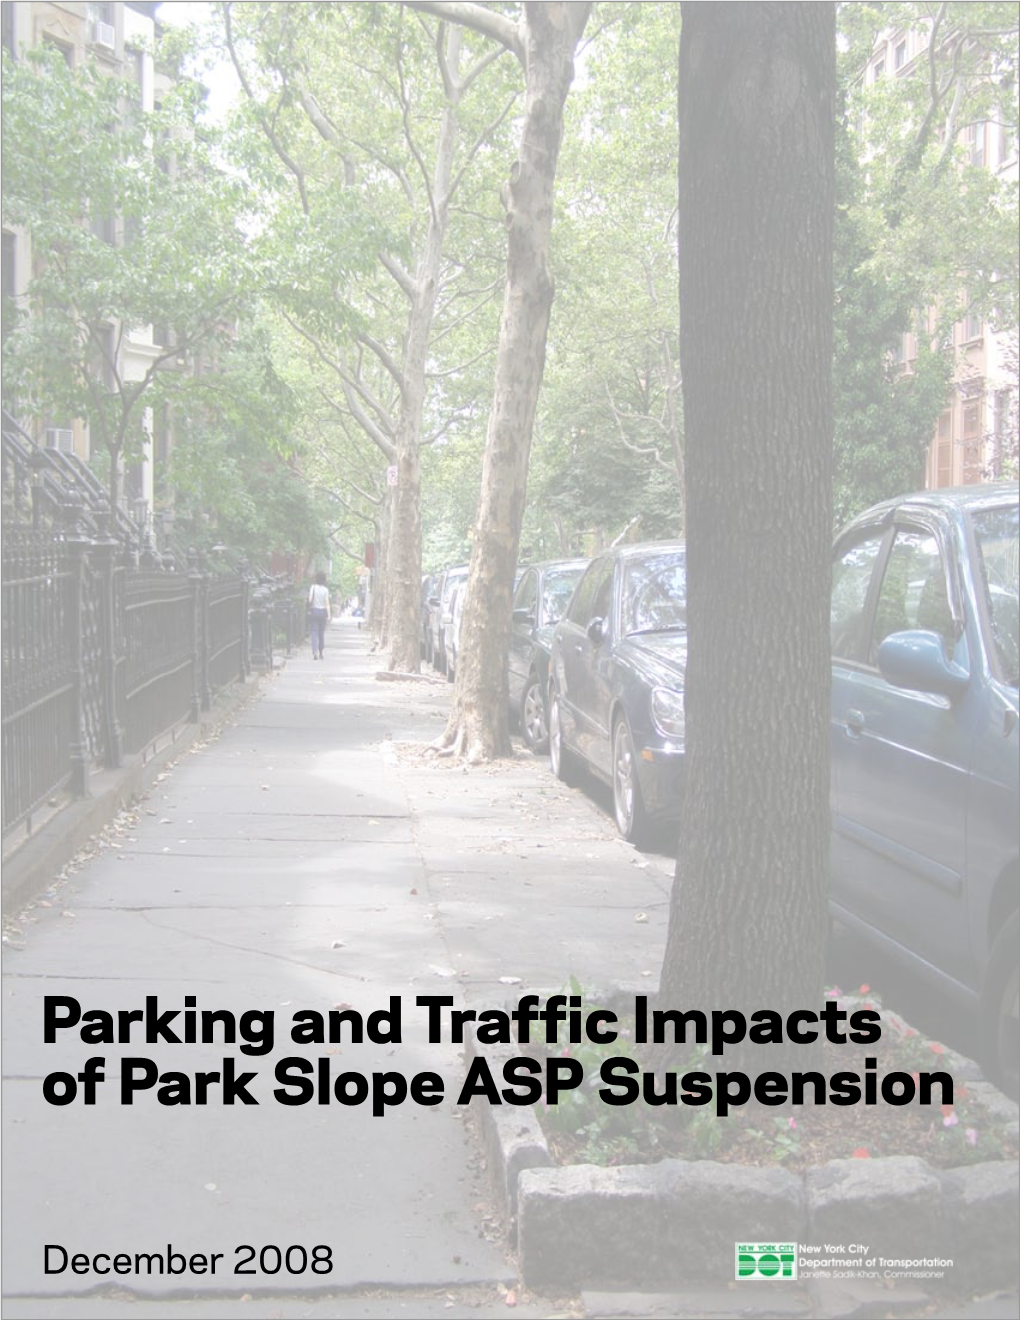 Parking and Traffic Impacts of Park Slope ASP Suspension